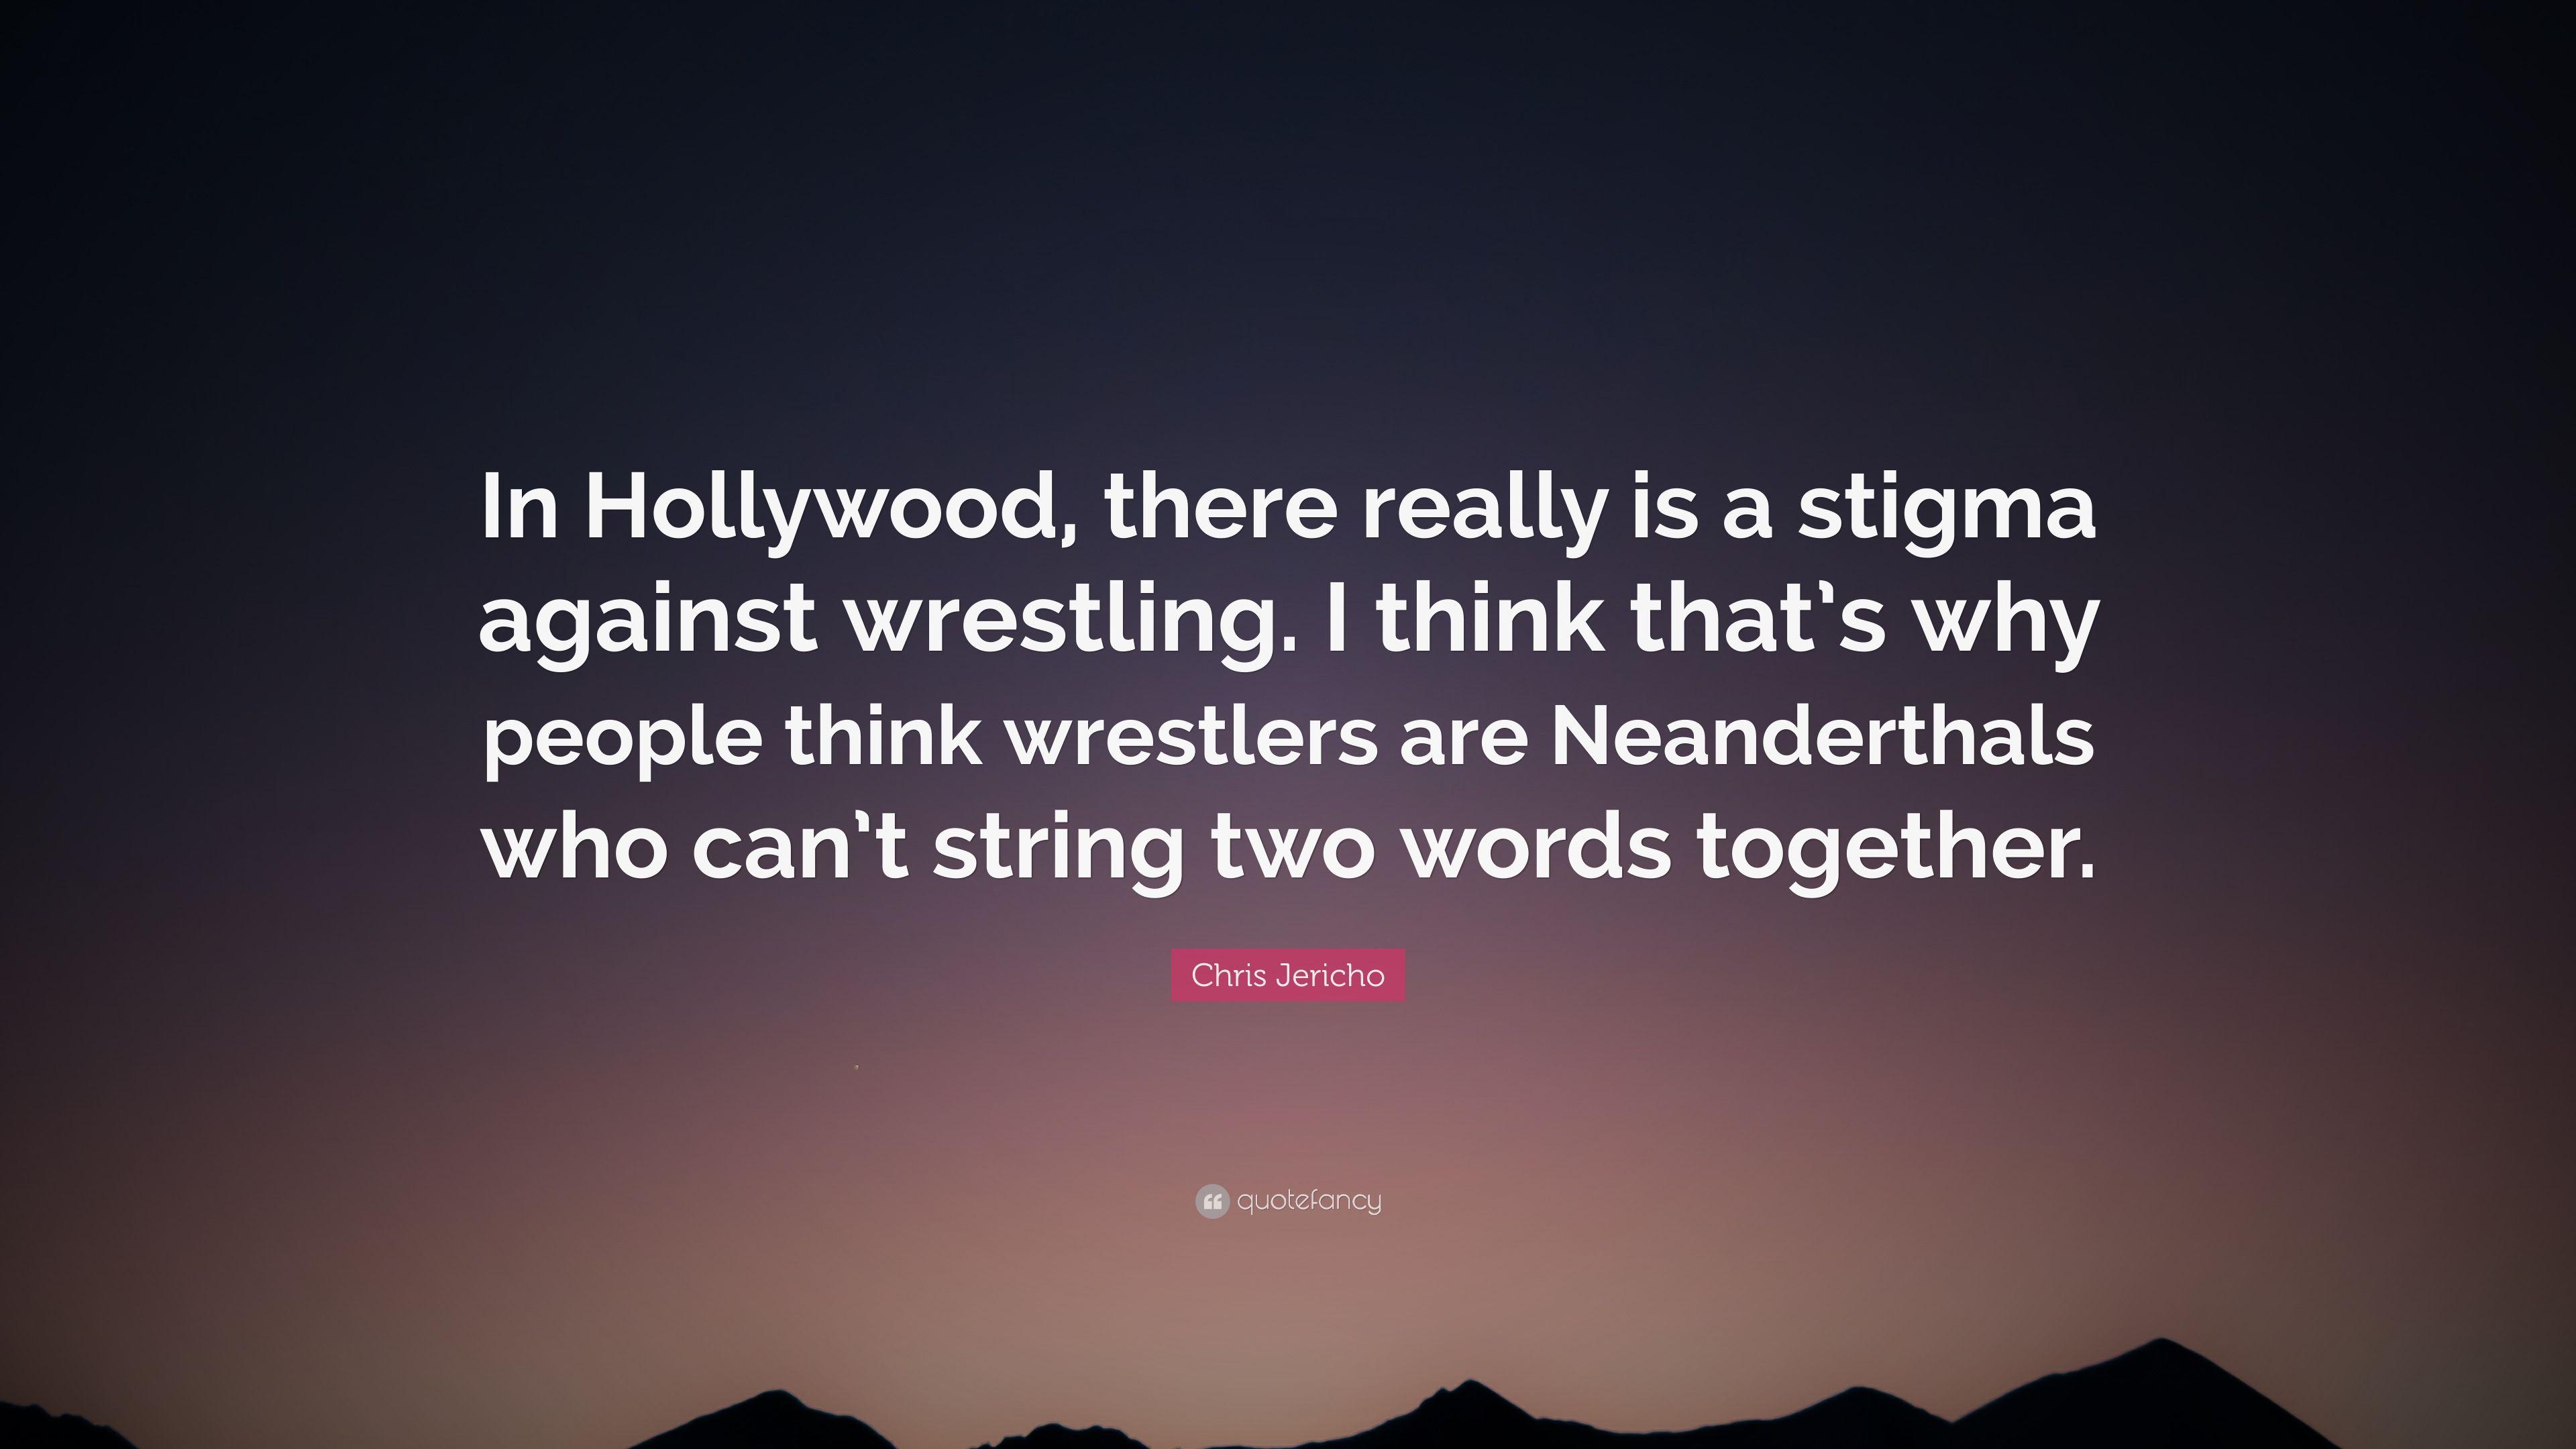 Chris Jericho Quote: “In Hollywood, there really is a stigma